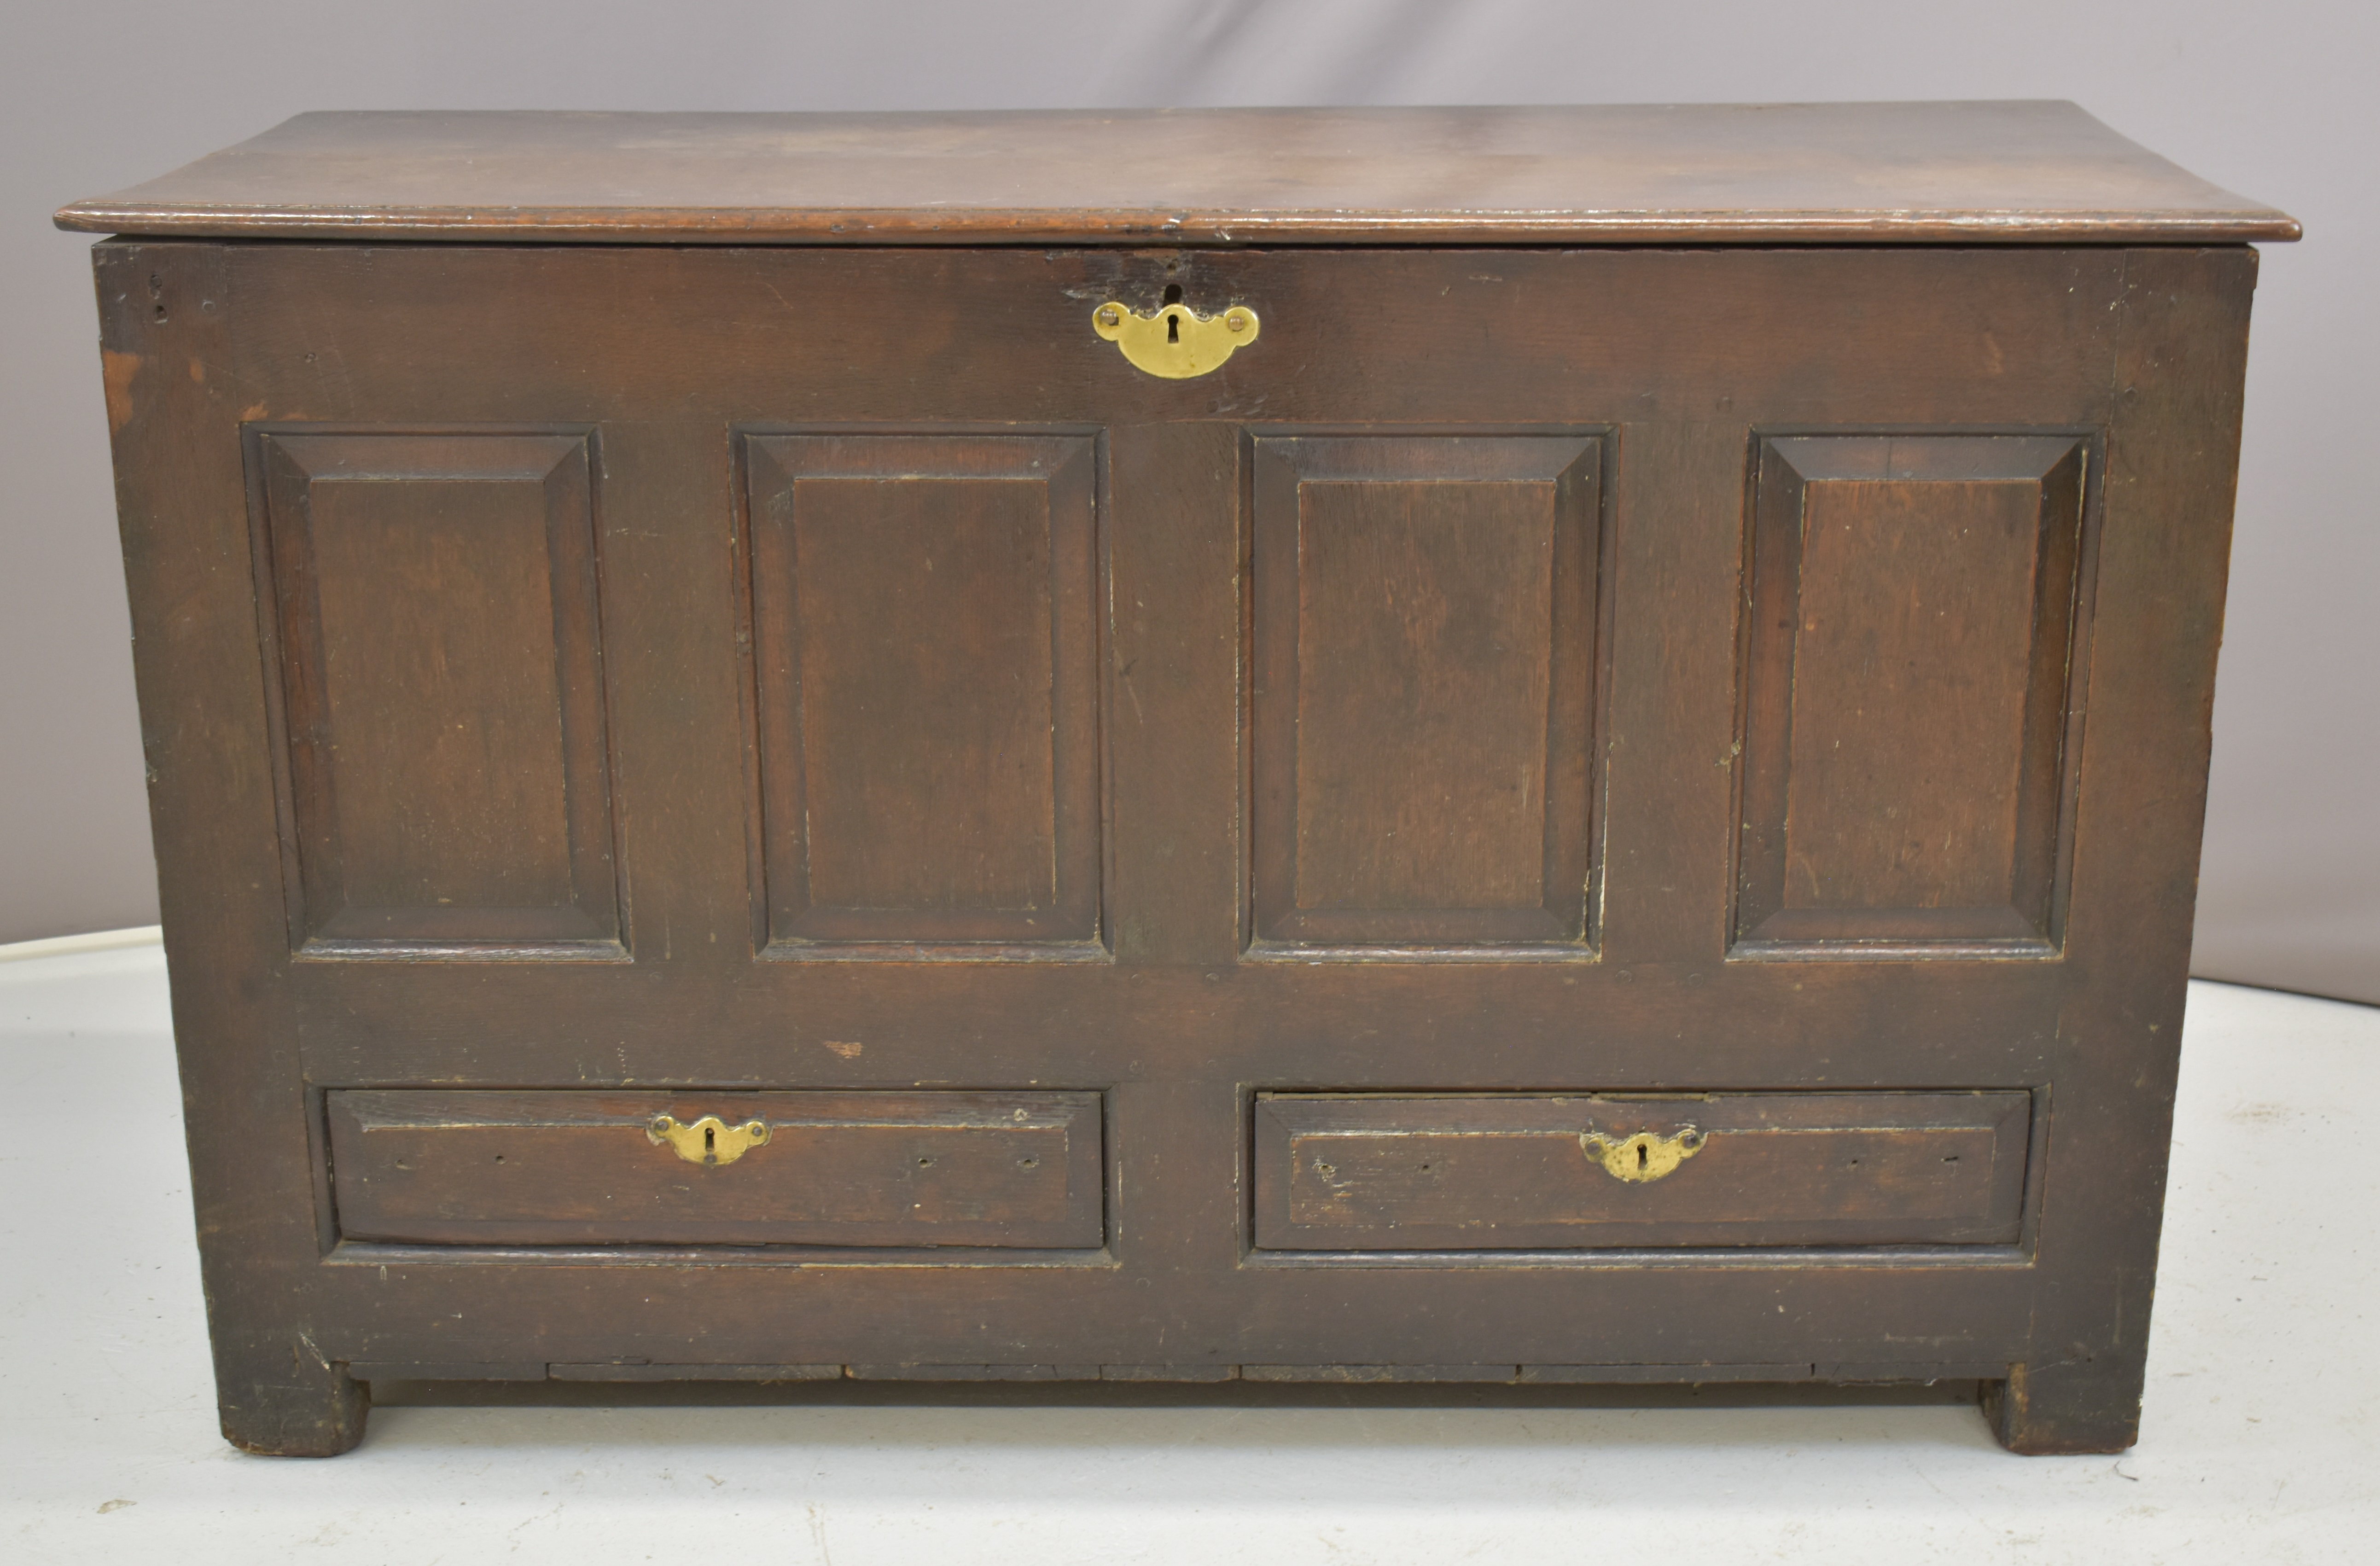 19thC oak panelled trunk with two faux lower drawers, W137 x D57 x H86cm